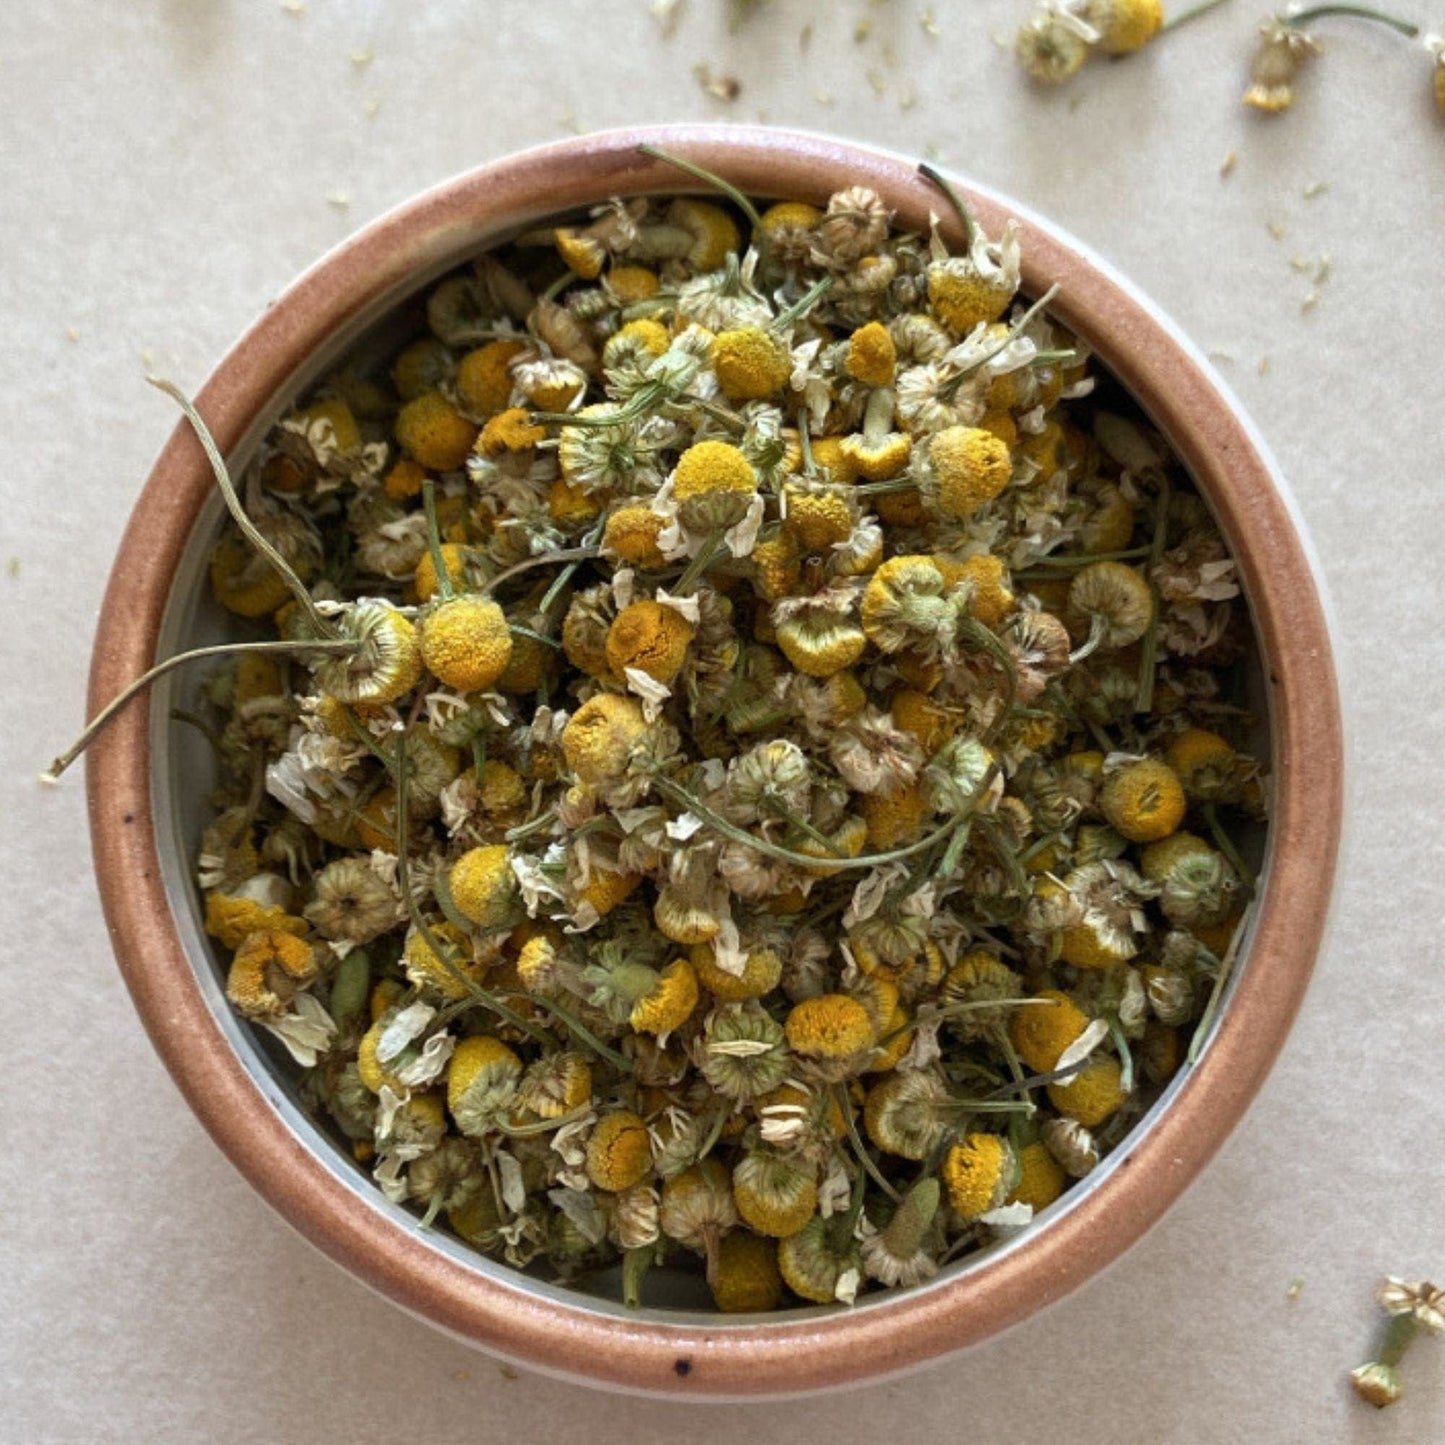 Chamomile flowers - Blend It Raw Apothecary